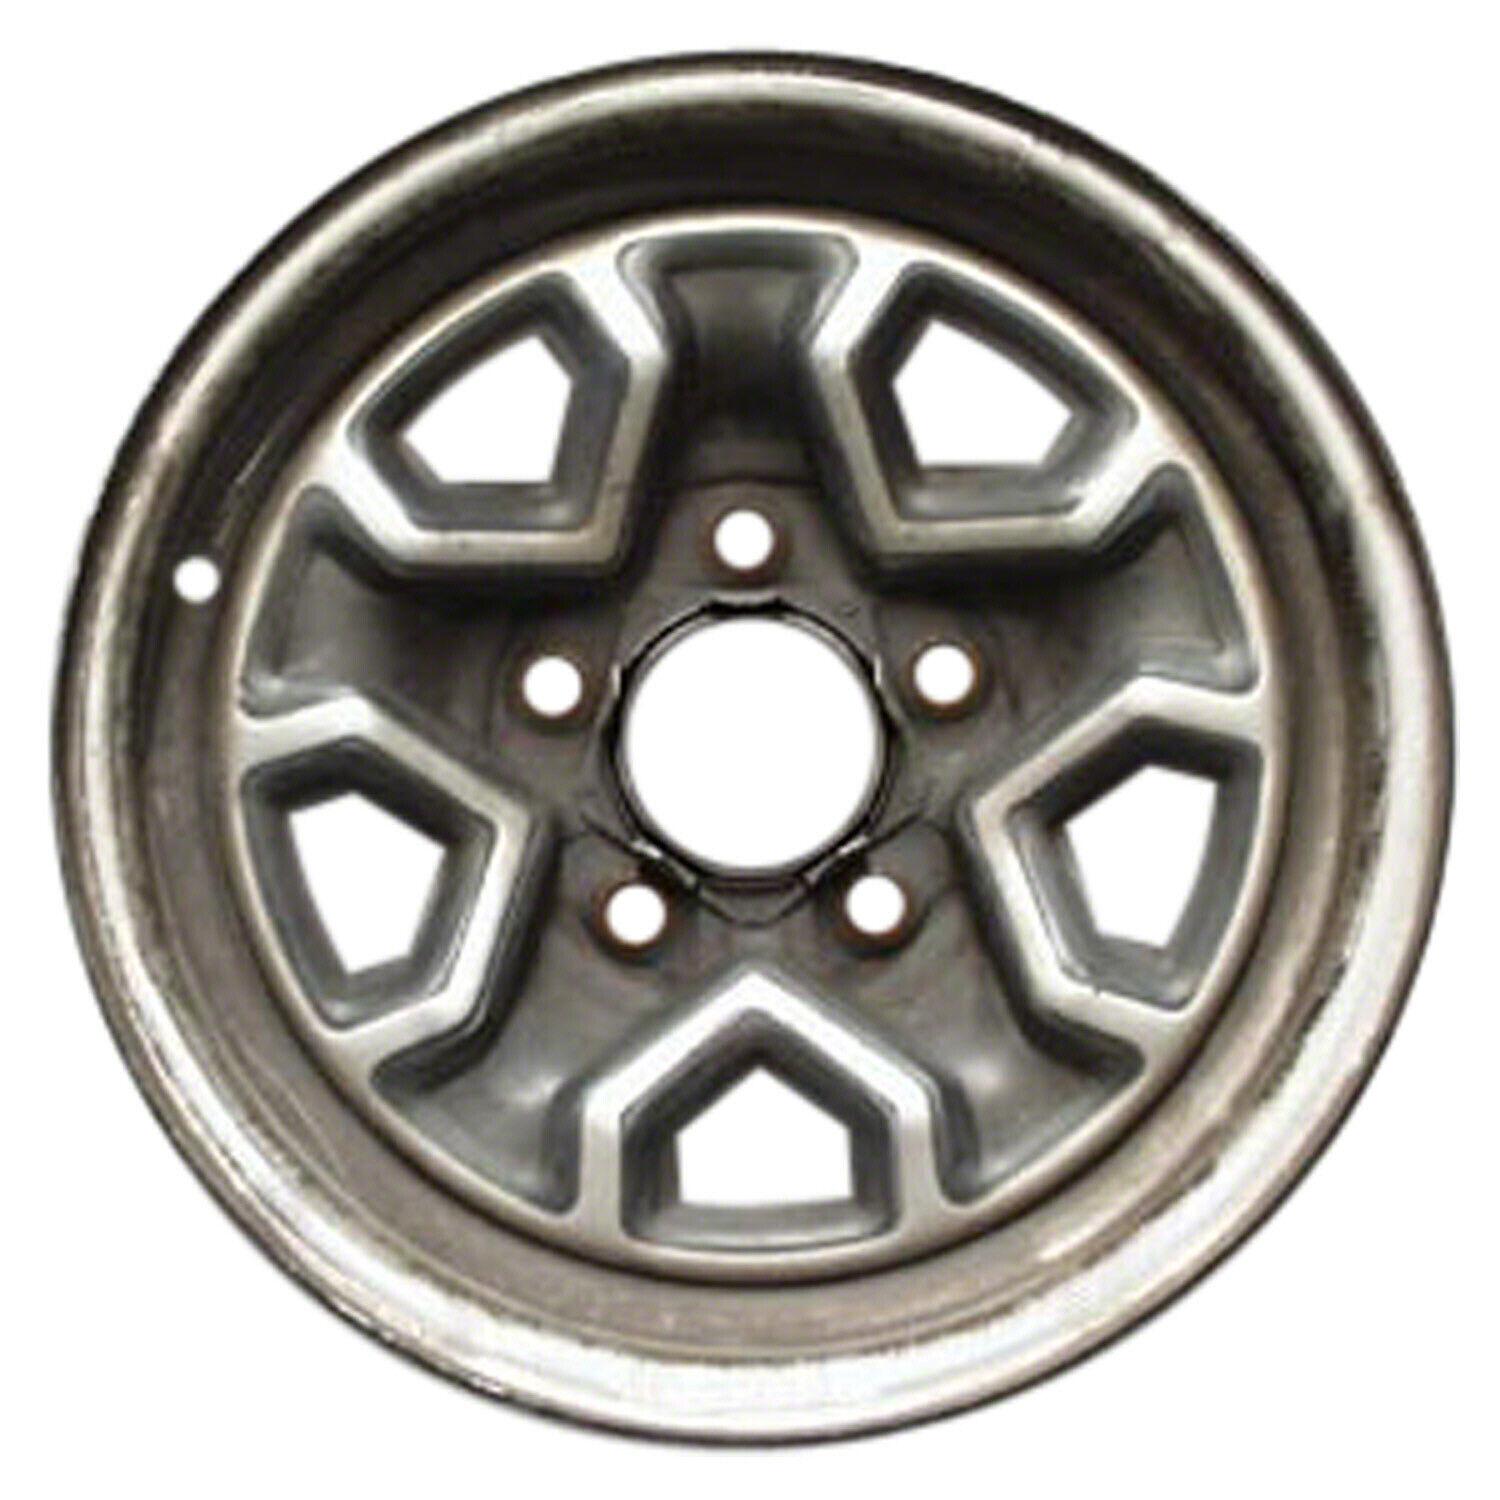 Reconditioned 14X6 Med Grey Wheel for 1982-1993 Chevrolet S10 Pickup 560-05011